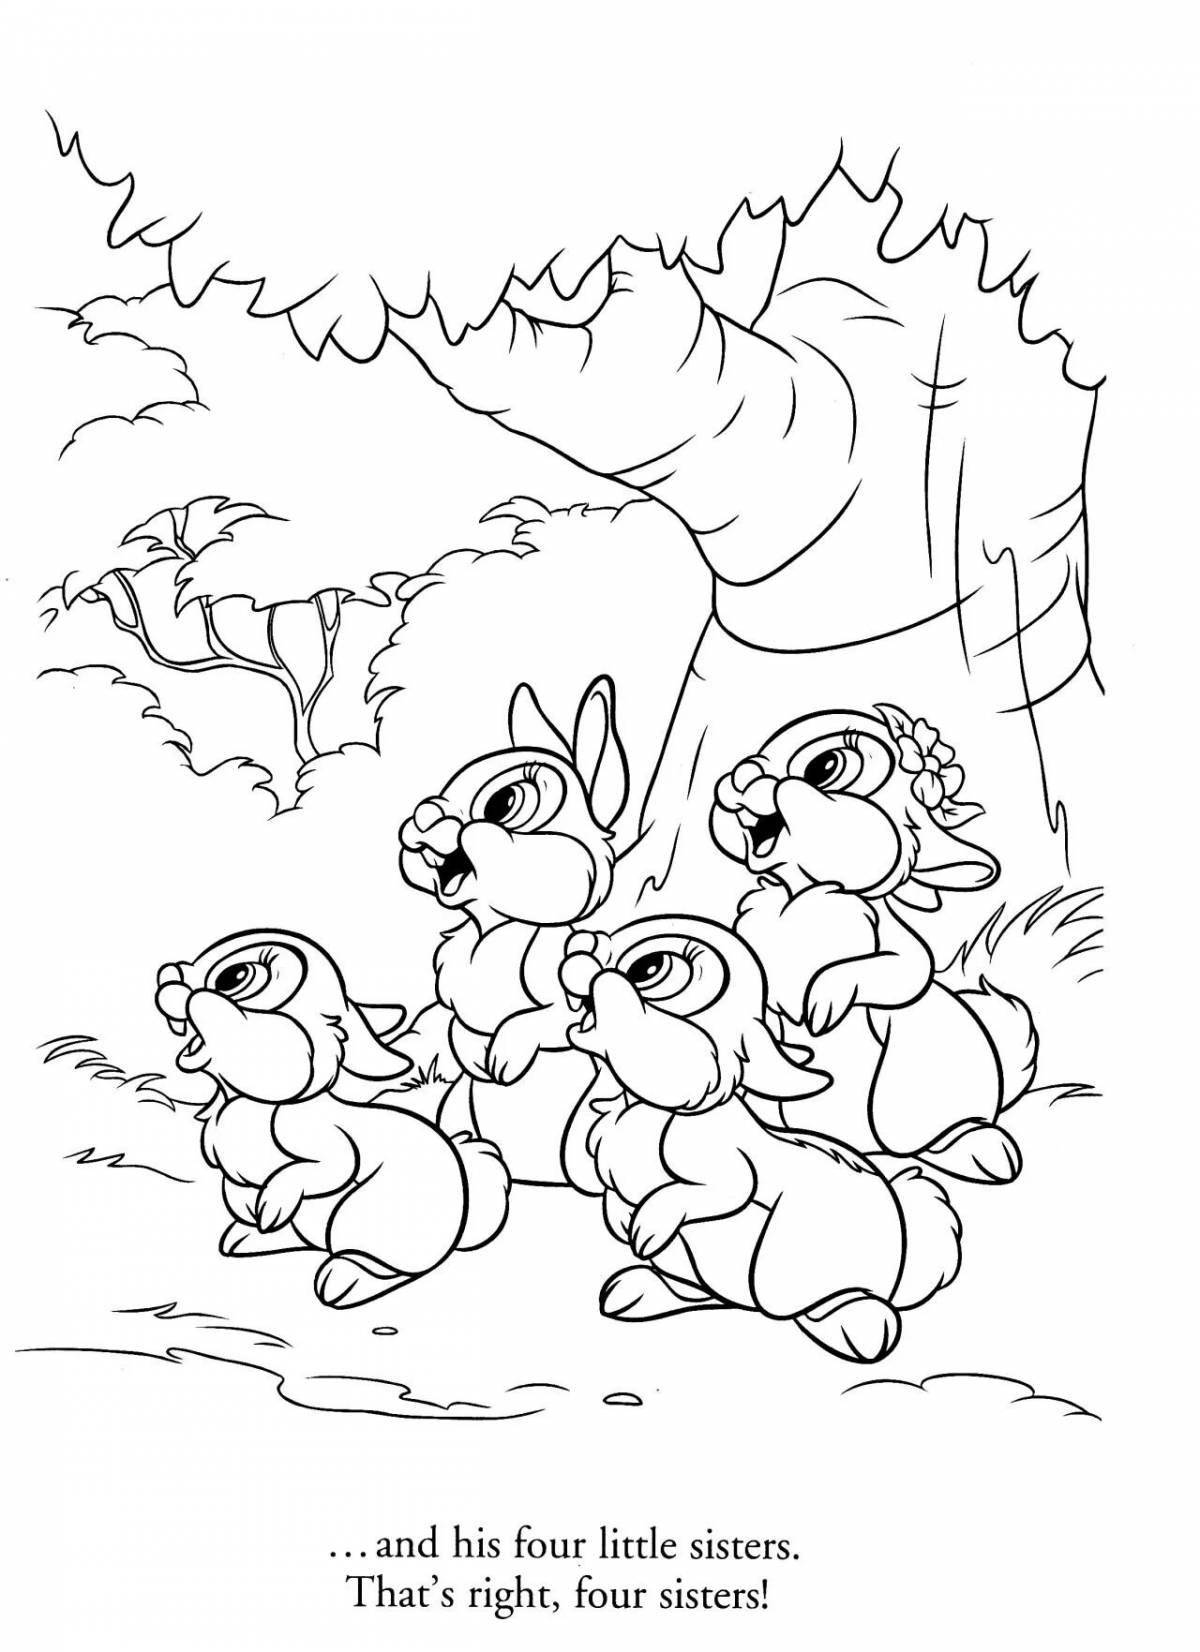 Bright autumn leaves coloring page